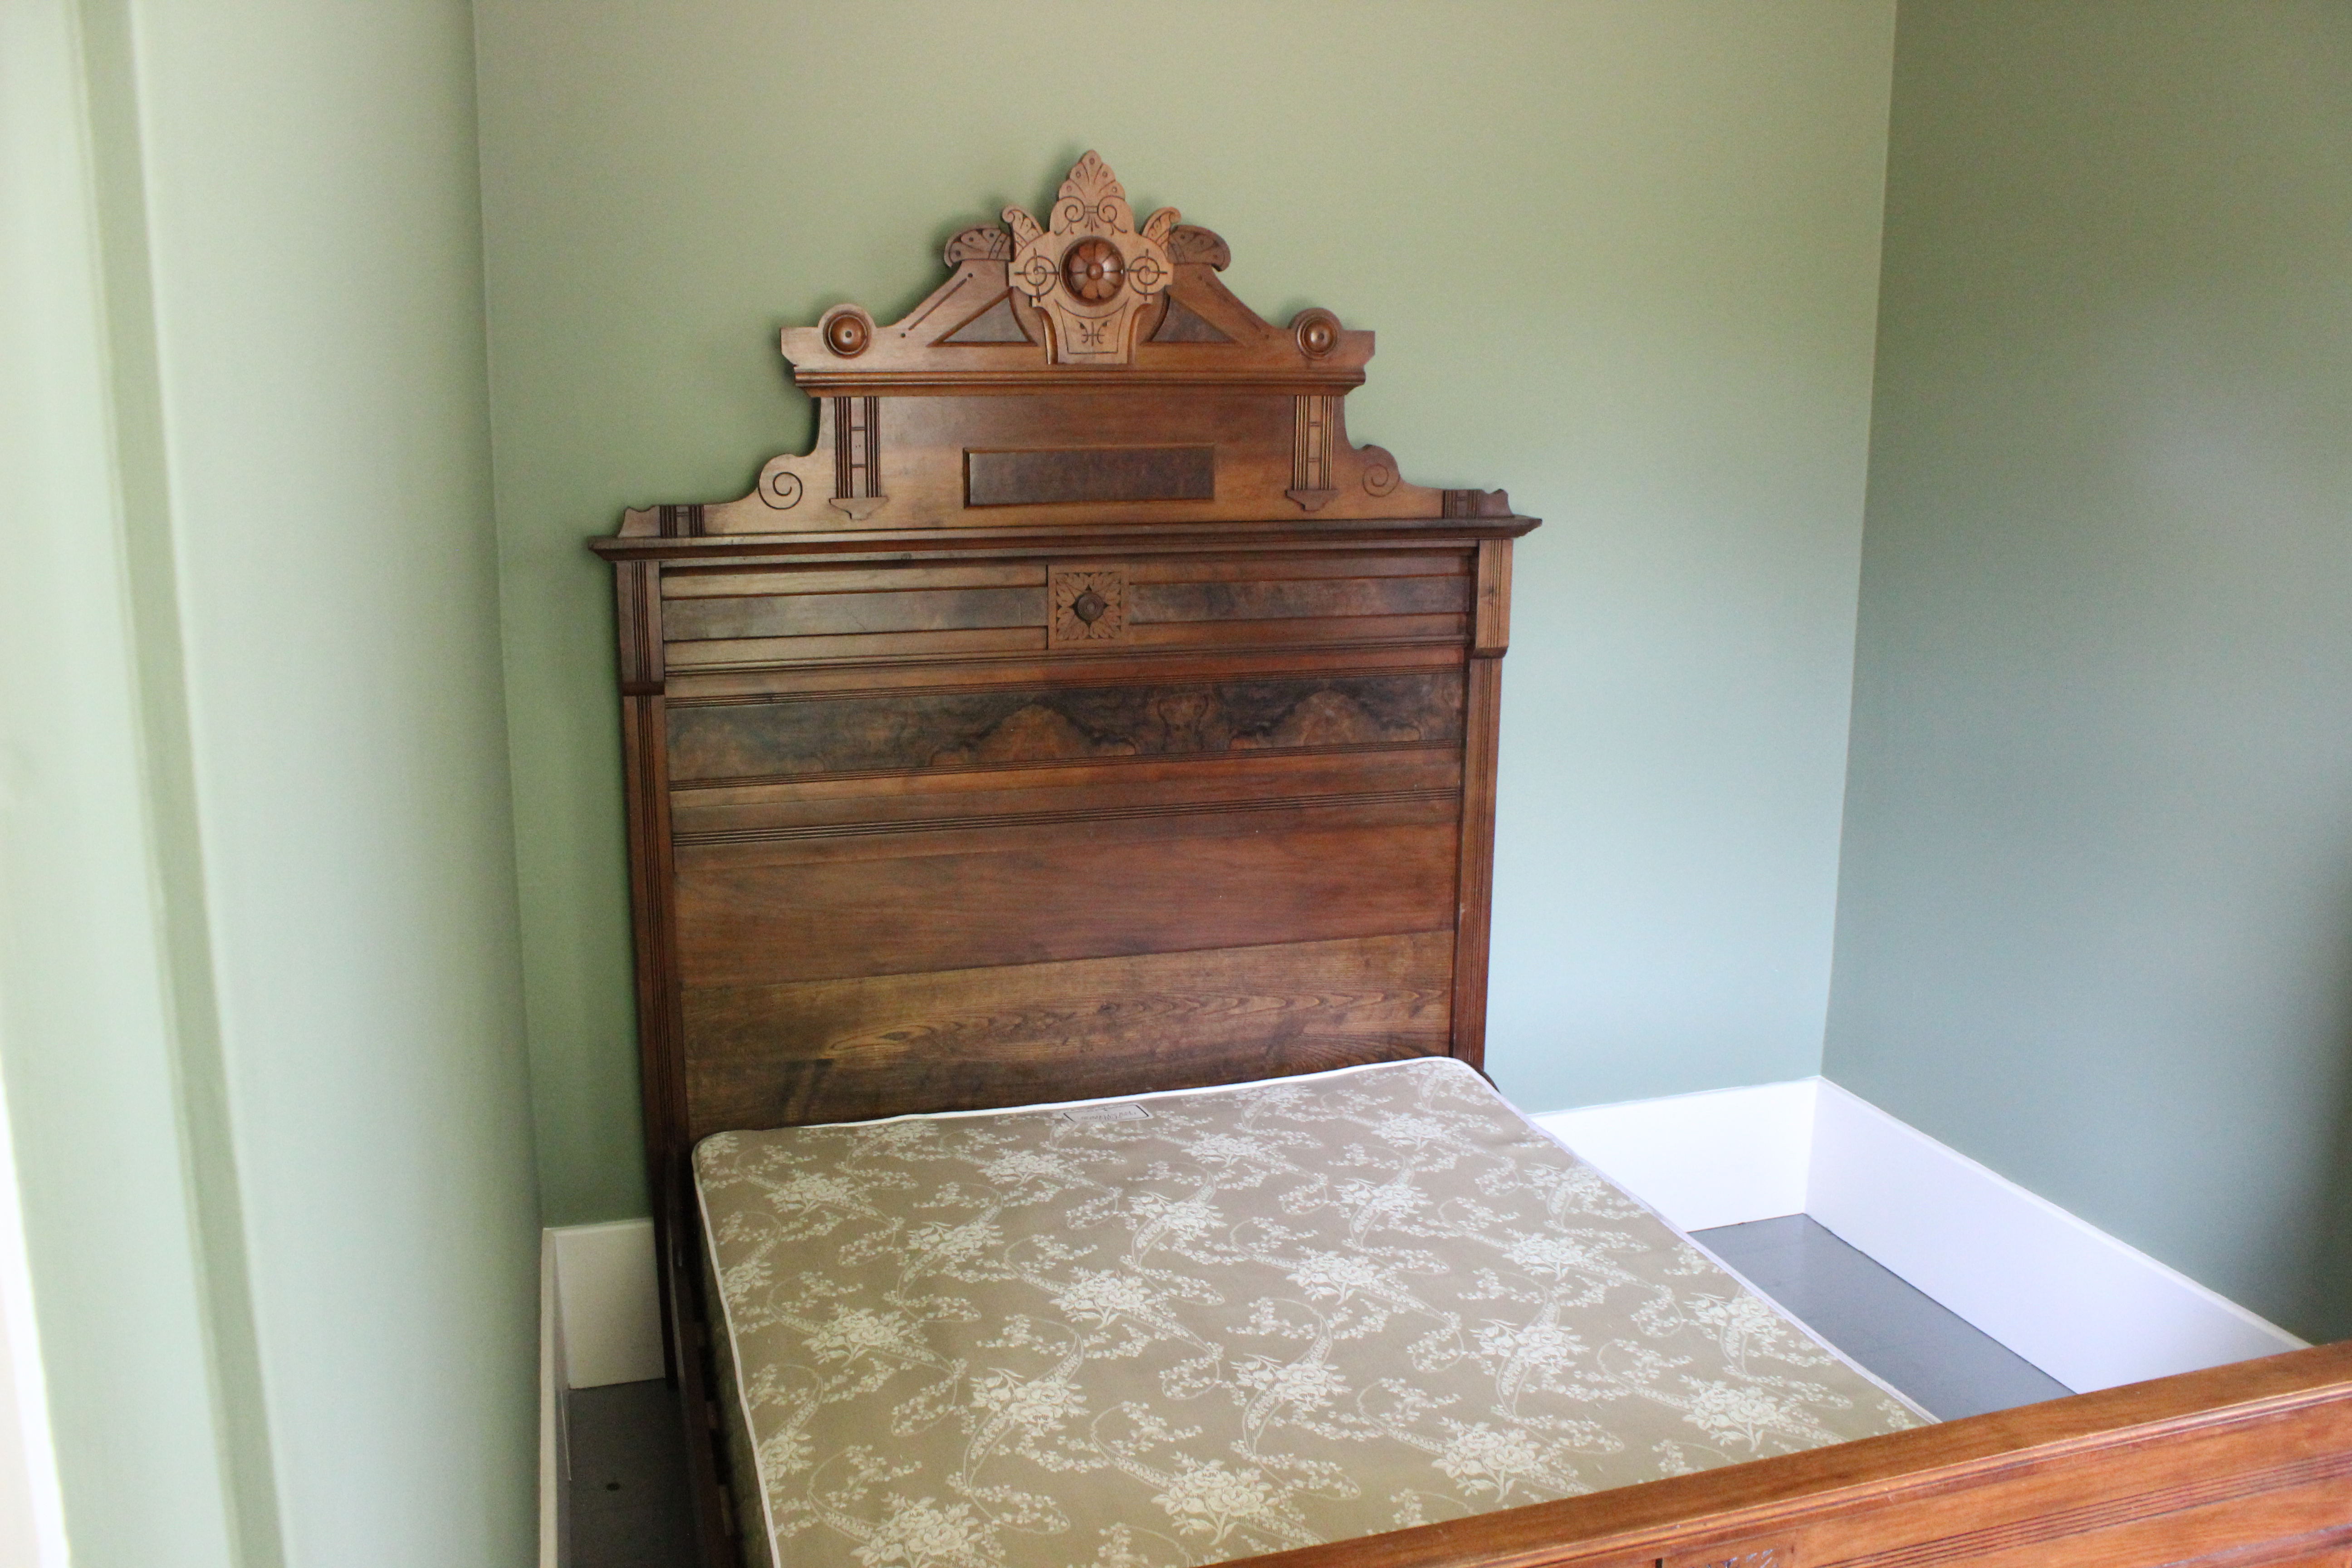 McGulpin Point Lighthouse Bedroom Museum